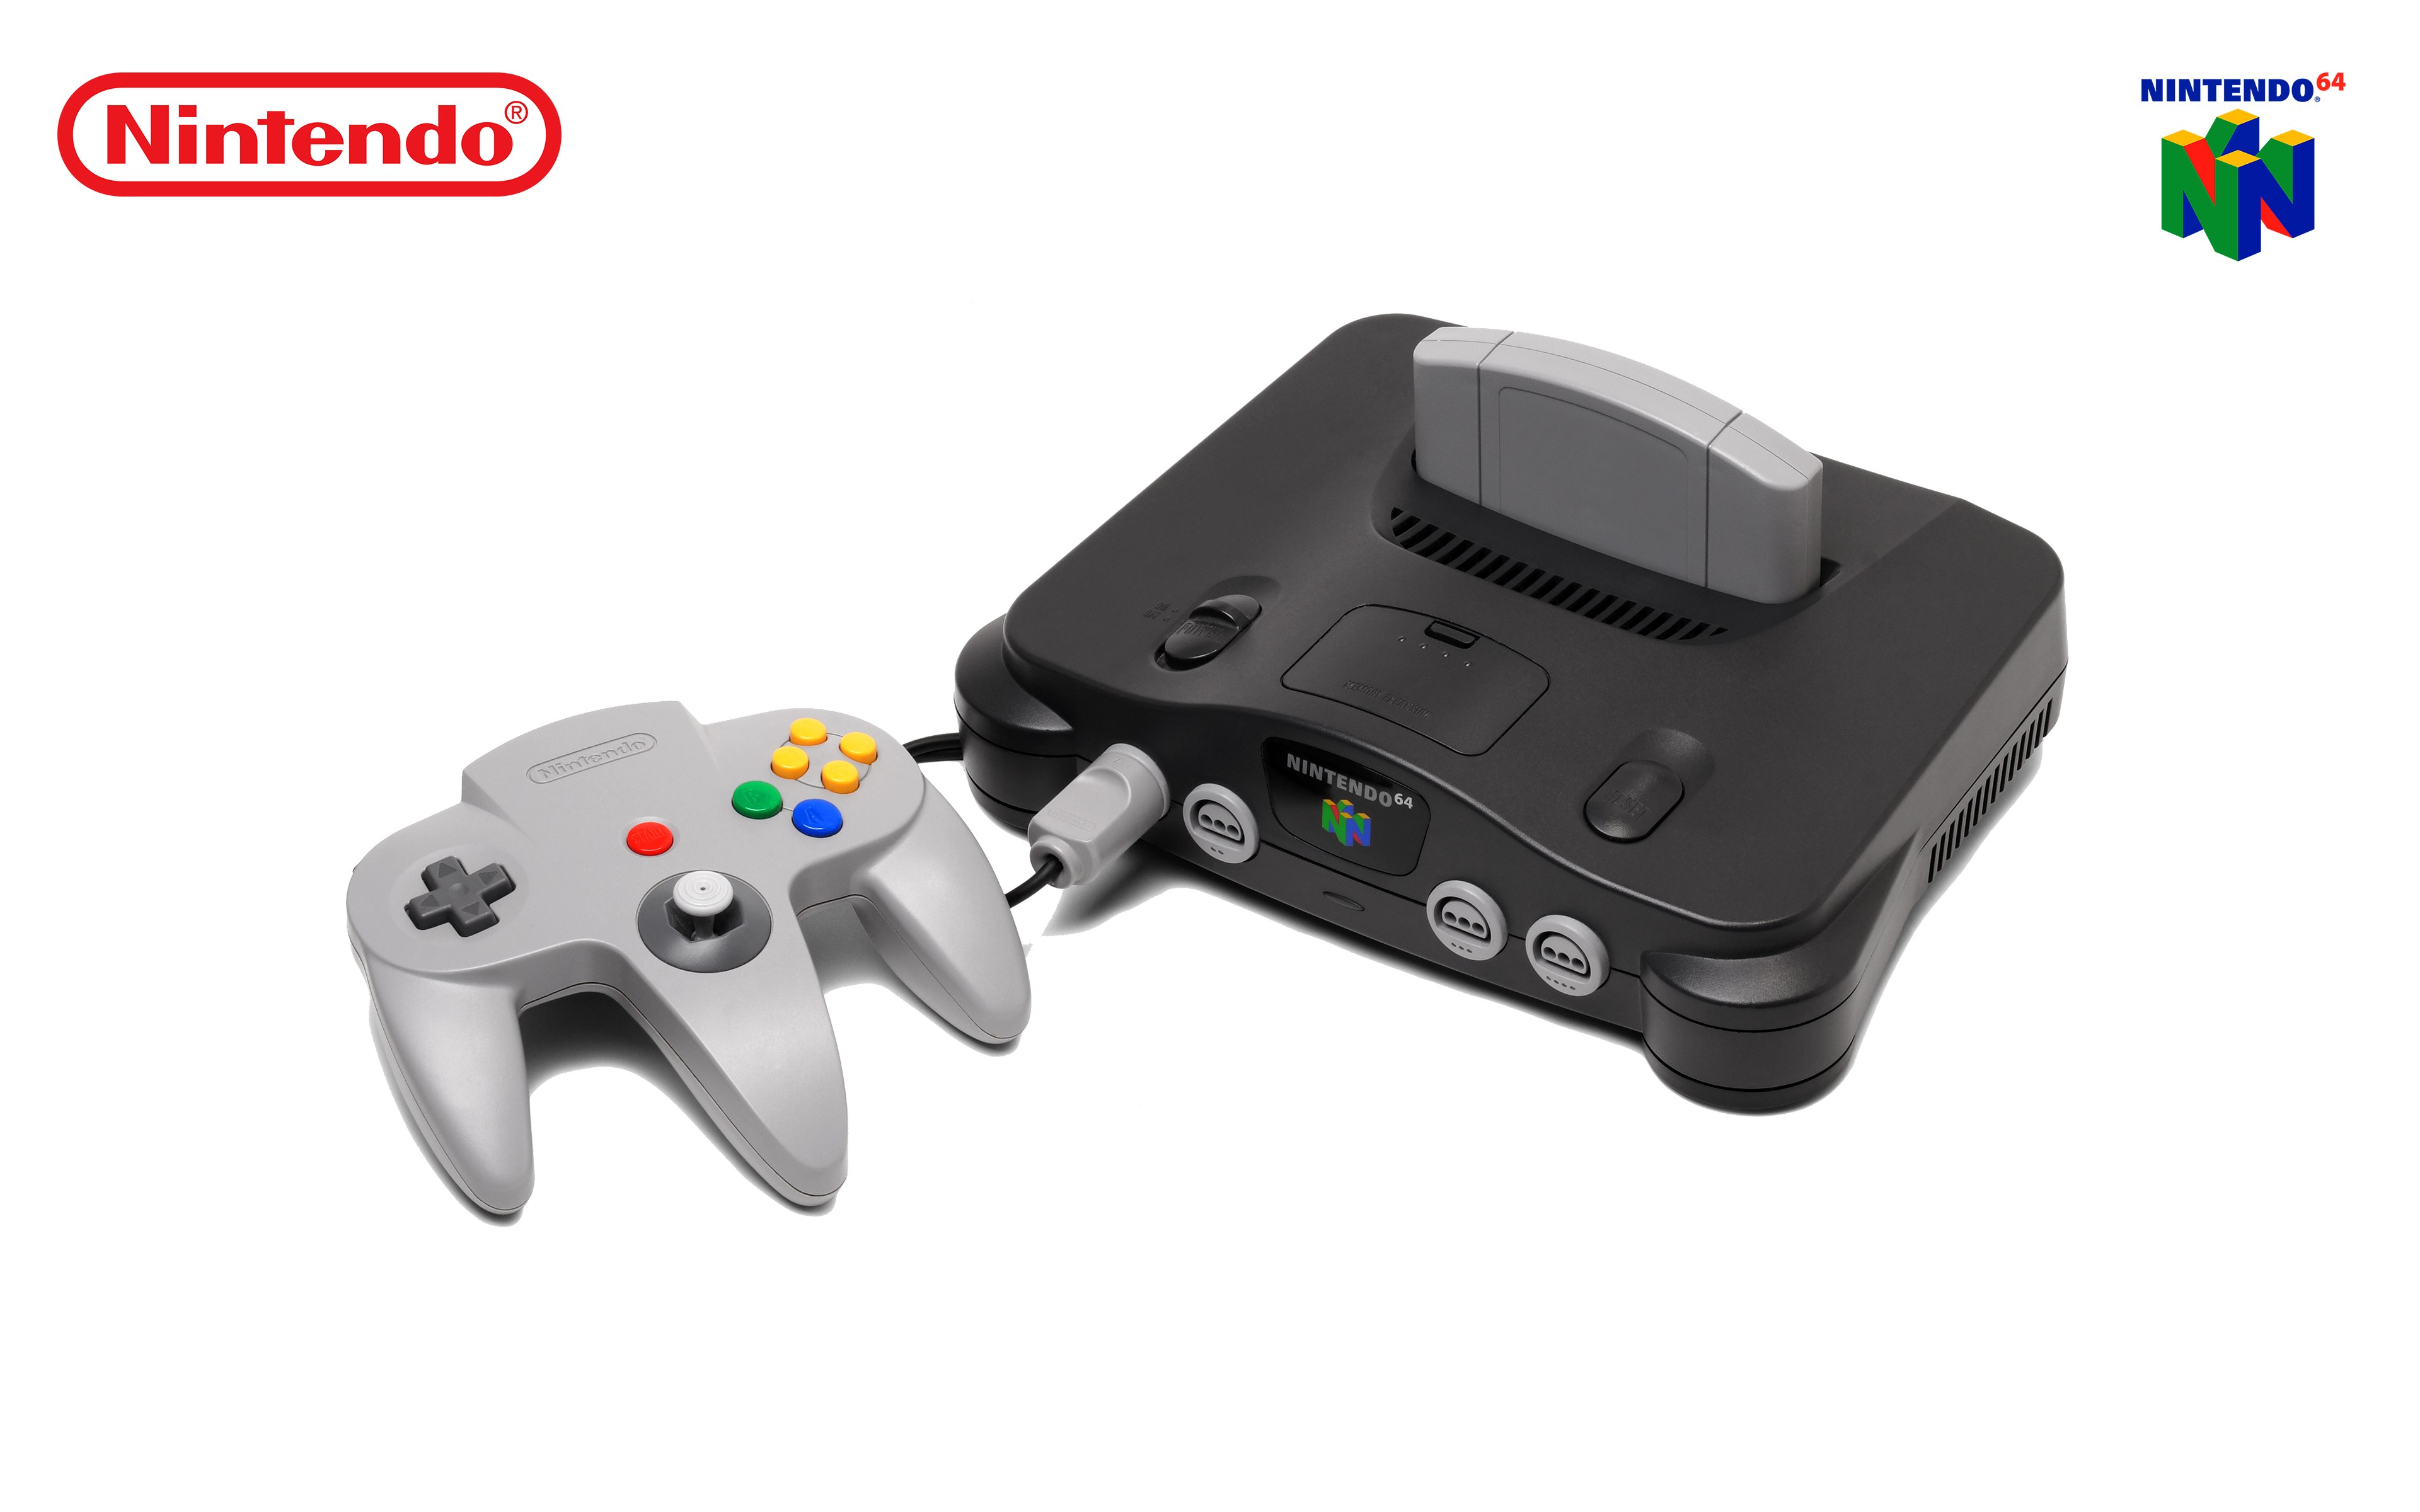 General 3840x2400 Nintendo 64 consoles video games simple background nostalgia retro console white background controllers watermarked